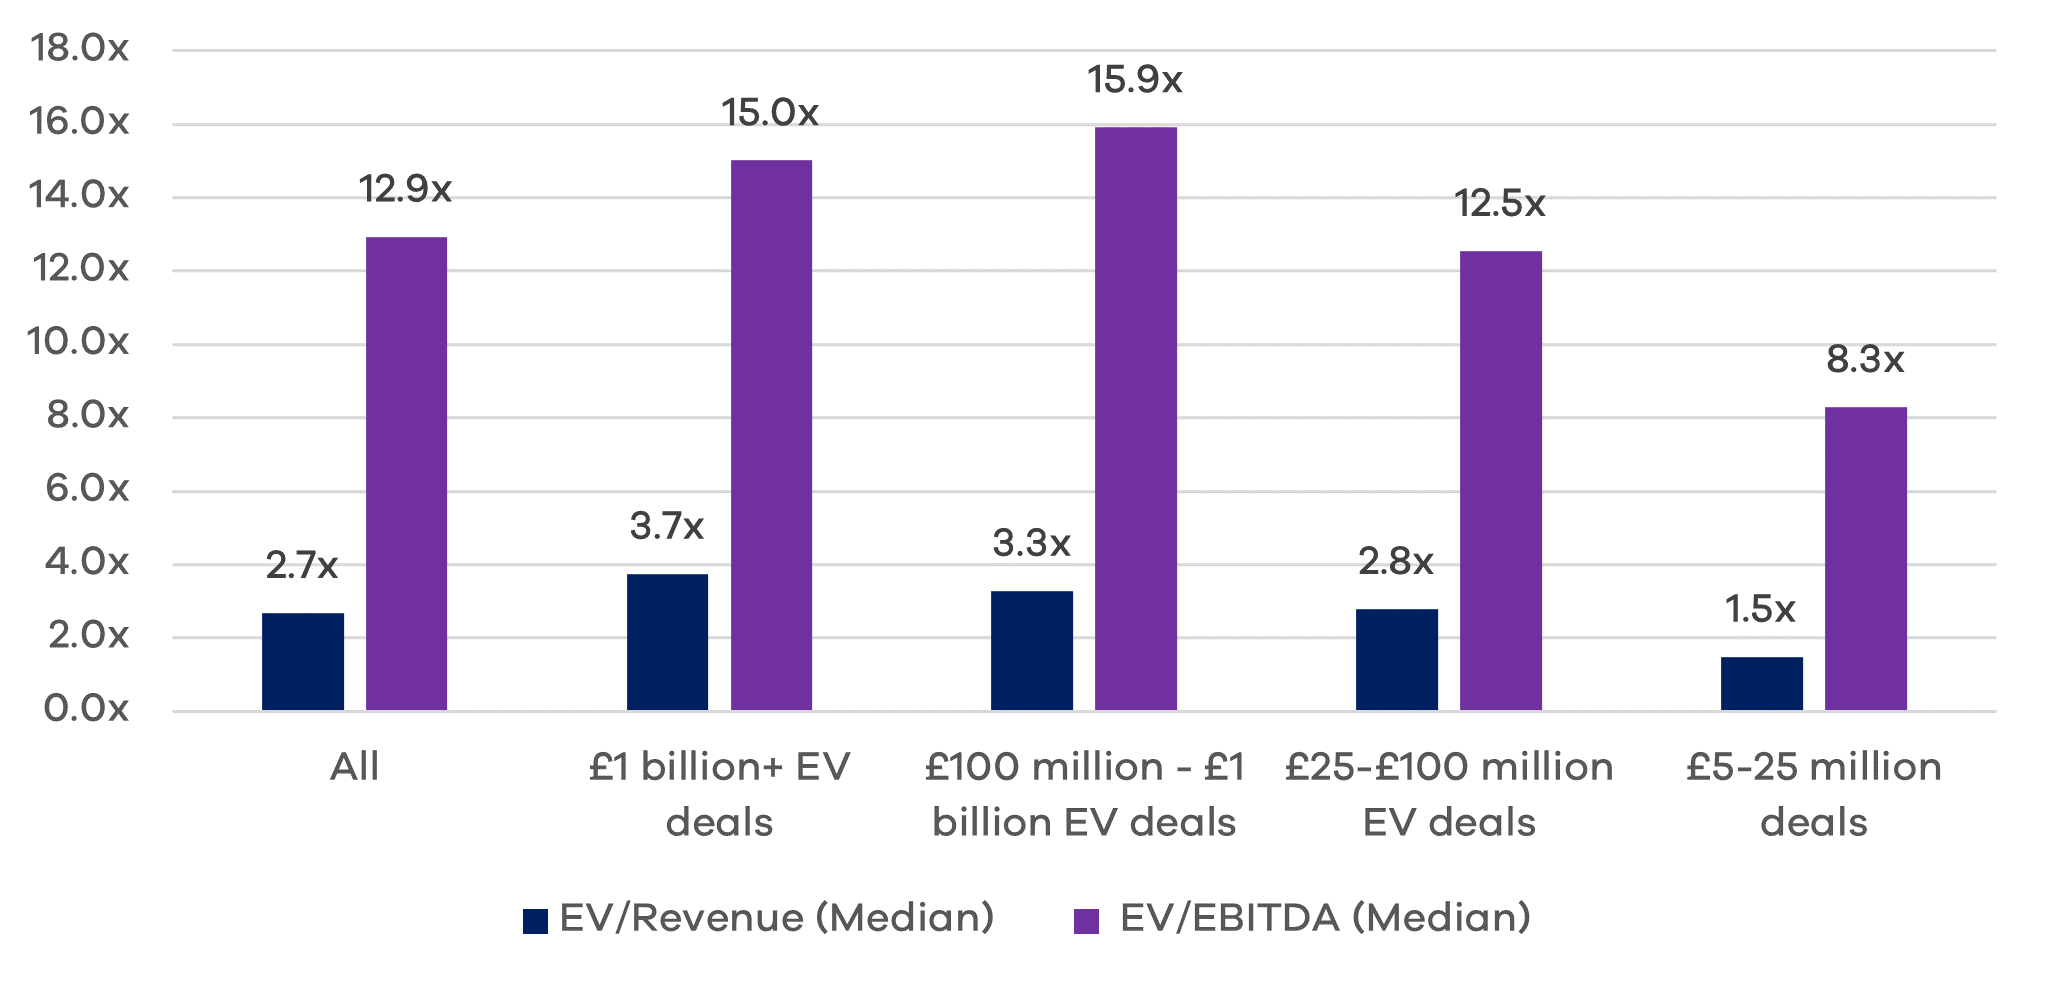 Bar chart showing the multiples between EV/Revenue compared to EV/EBITDA 